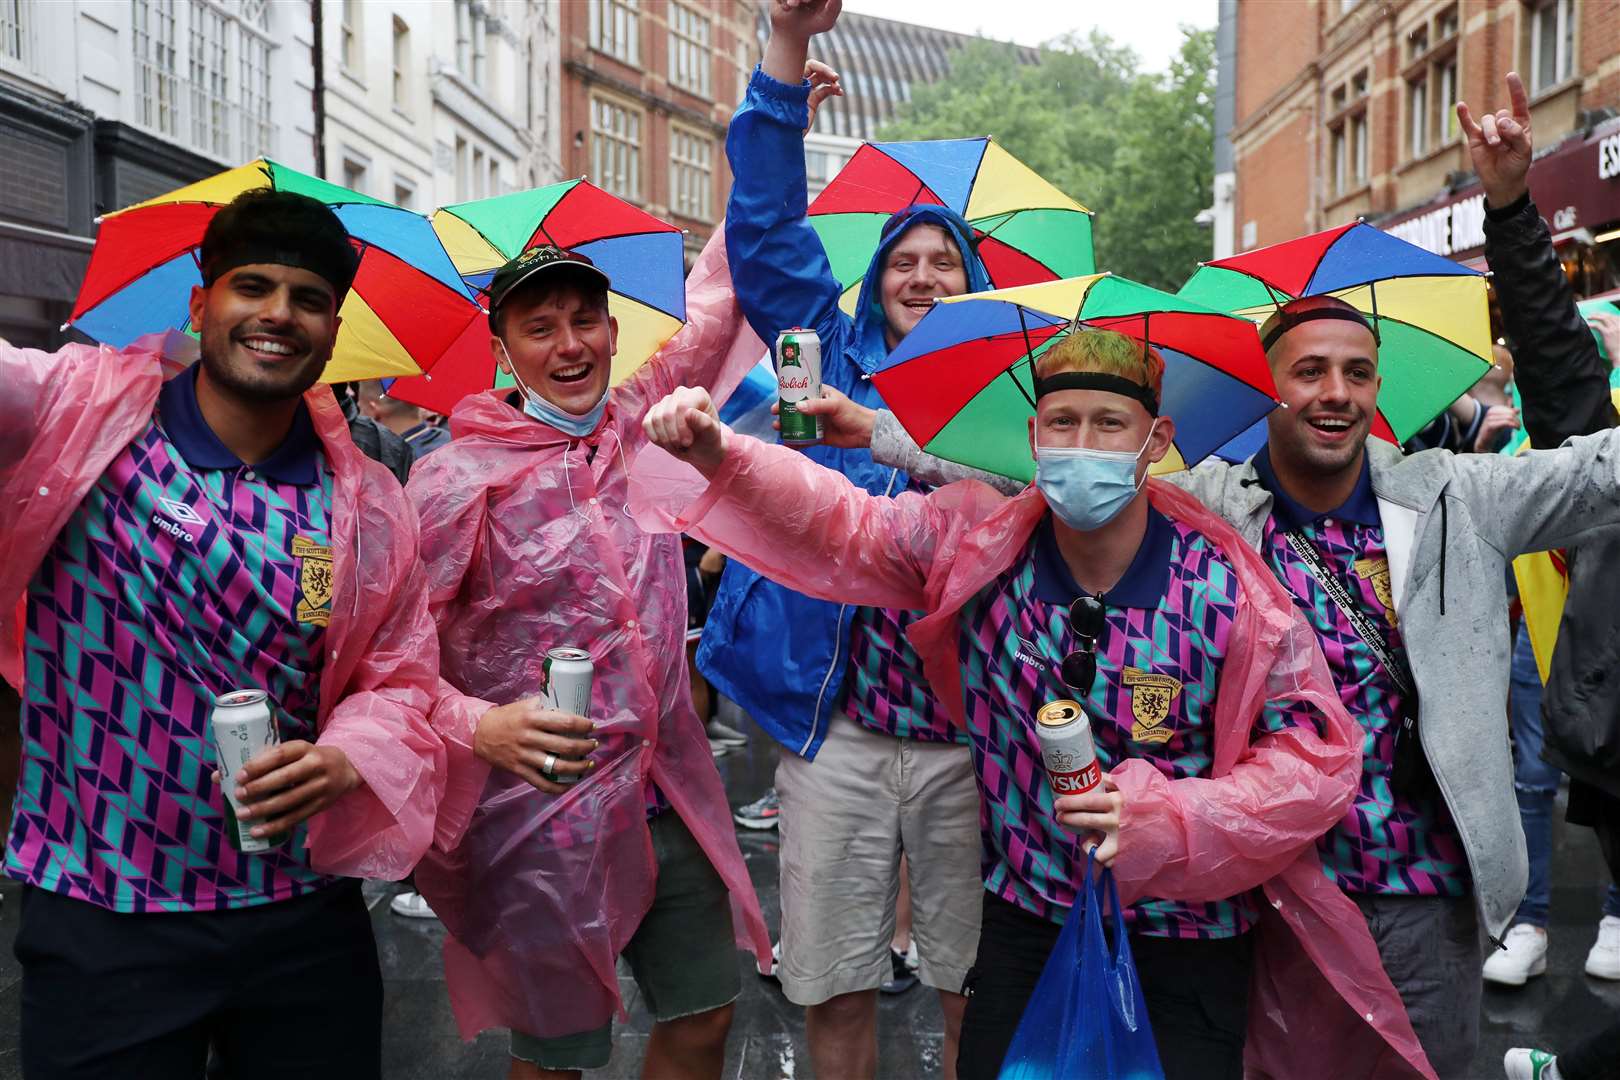 Scotland fans bring some colour to a rain-soaked Leicester Square (Kieran Cleeves/PA)